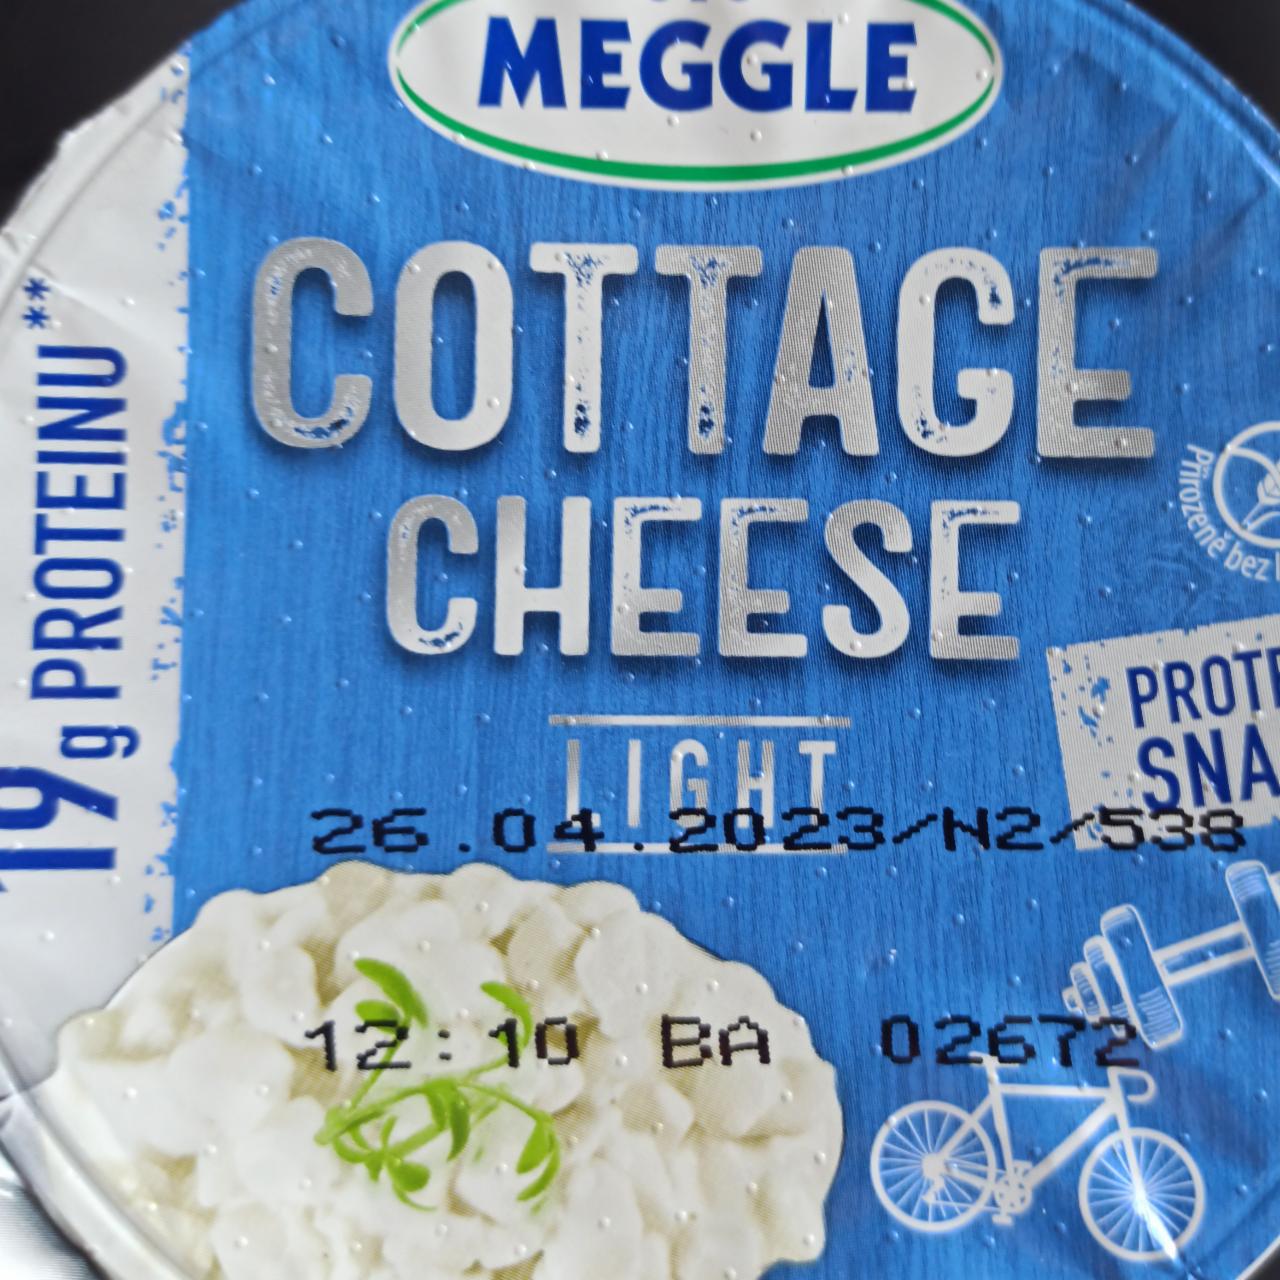 Фото - Cottage cheese lught Meggle